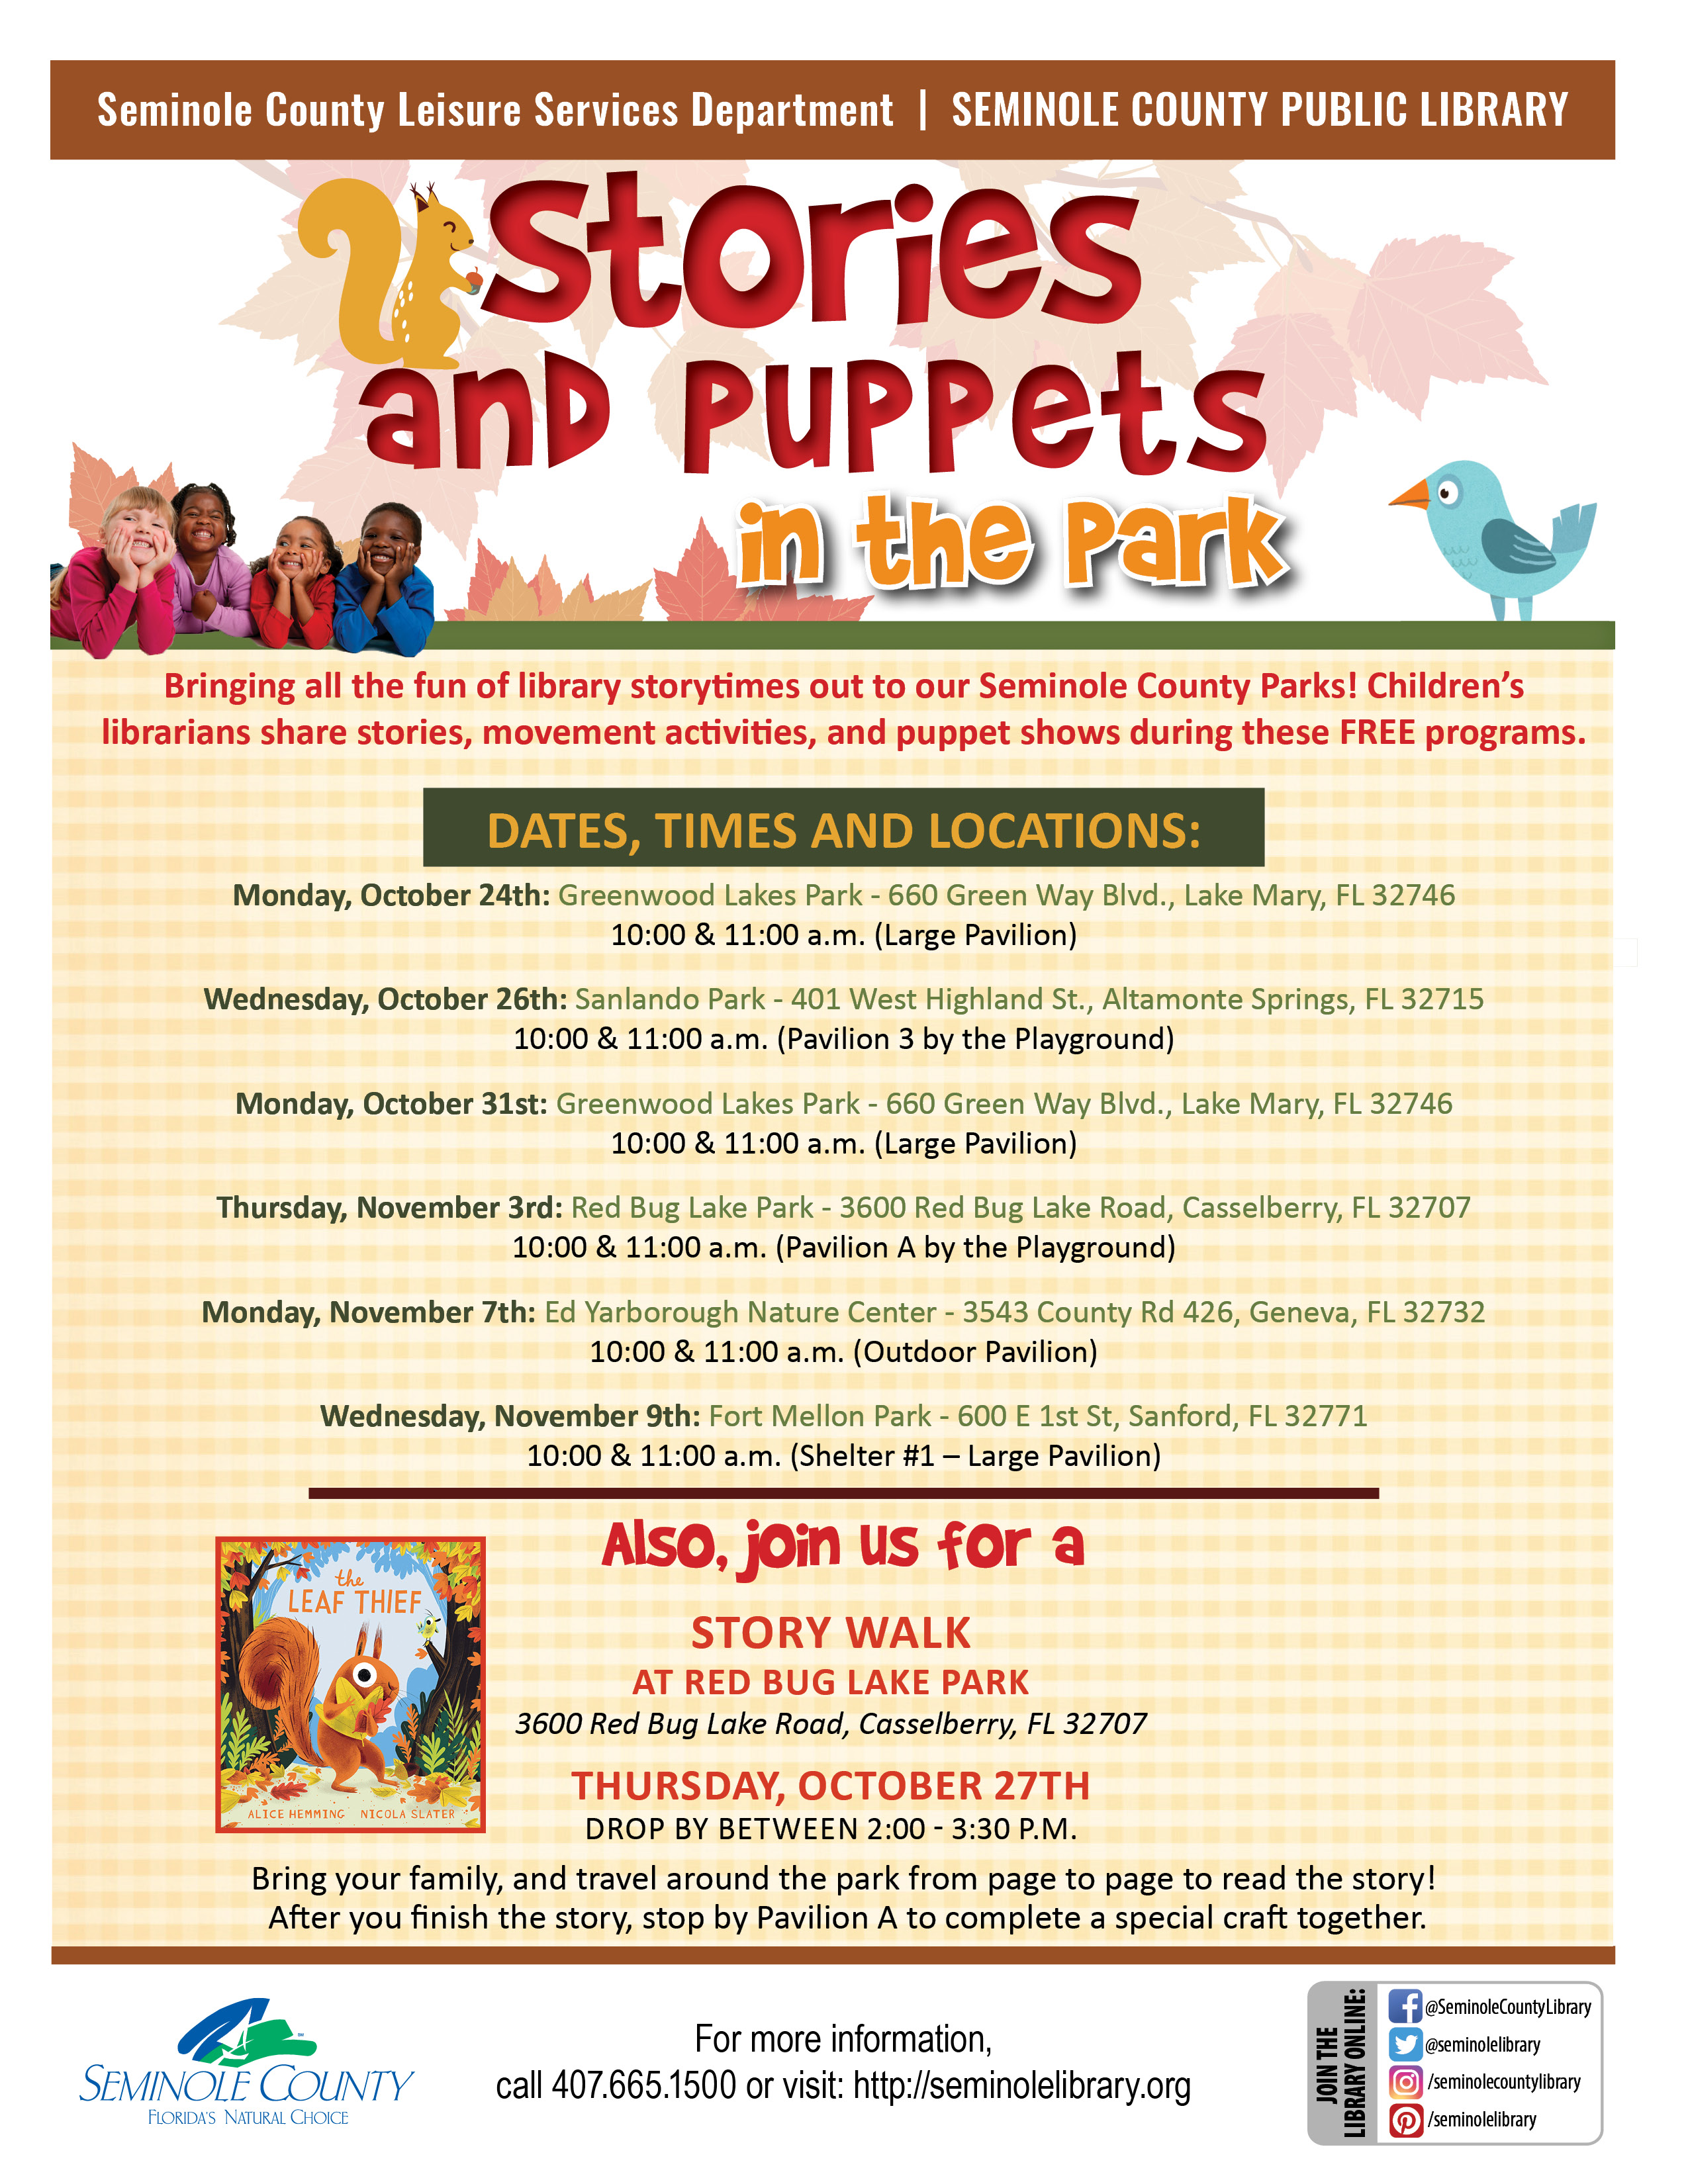 Stories and Puppets in the Park, plus Story Walk